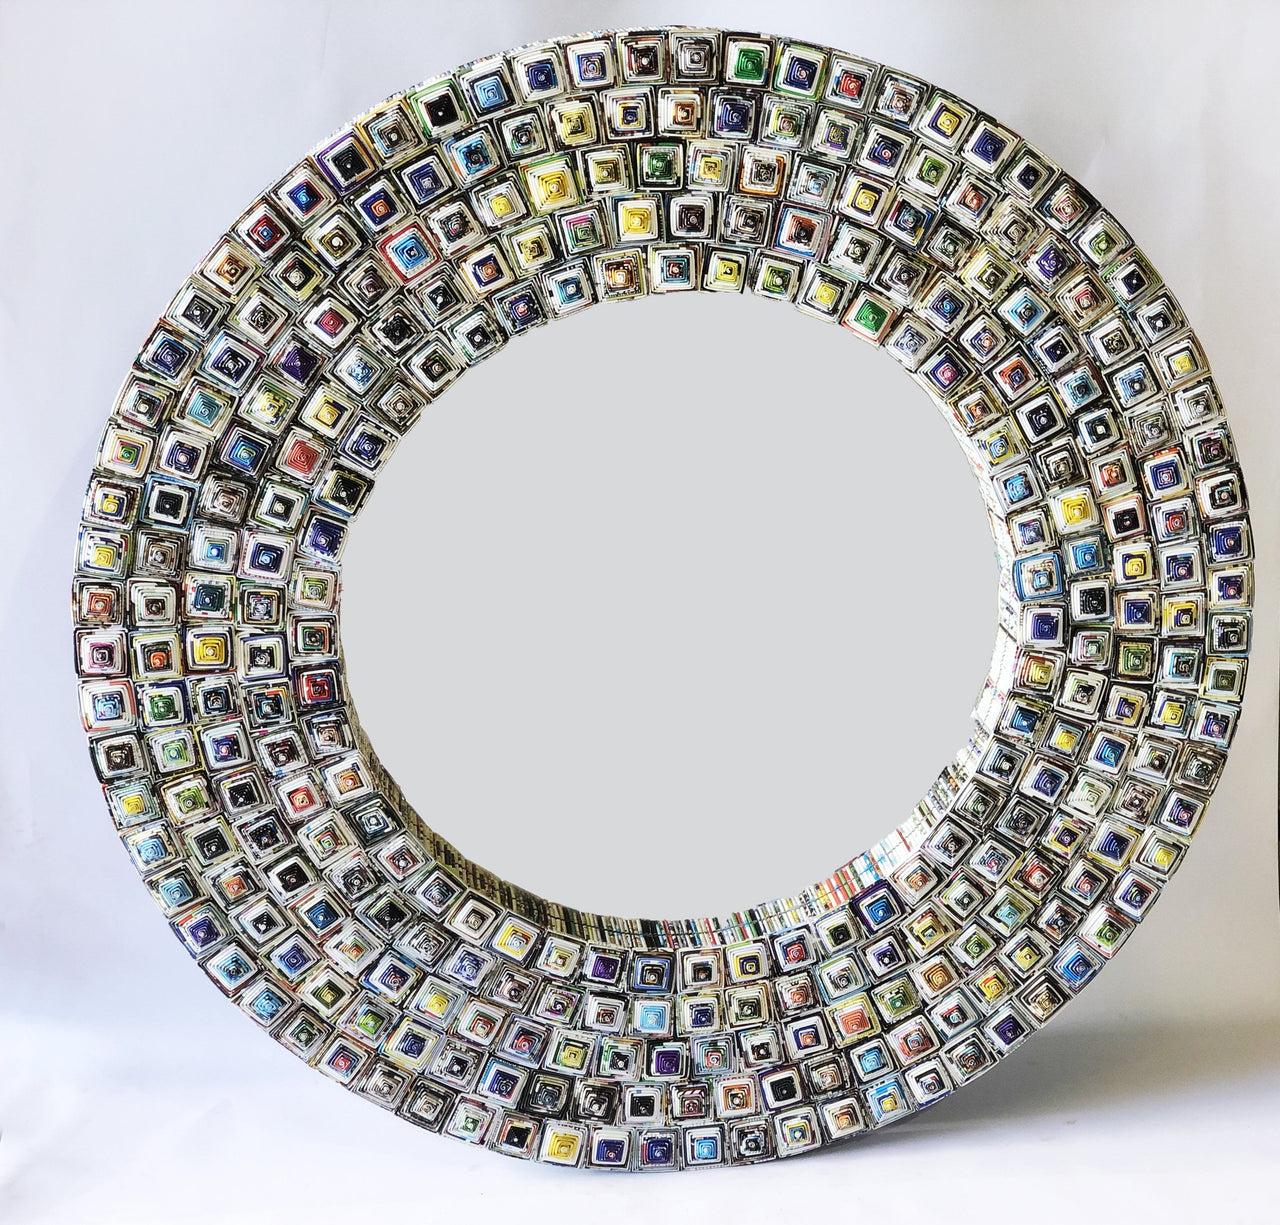 AFD Quilled Large Pyramid Art Mirror 47" Round Mirrors AFD MULTI COLORED 